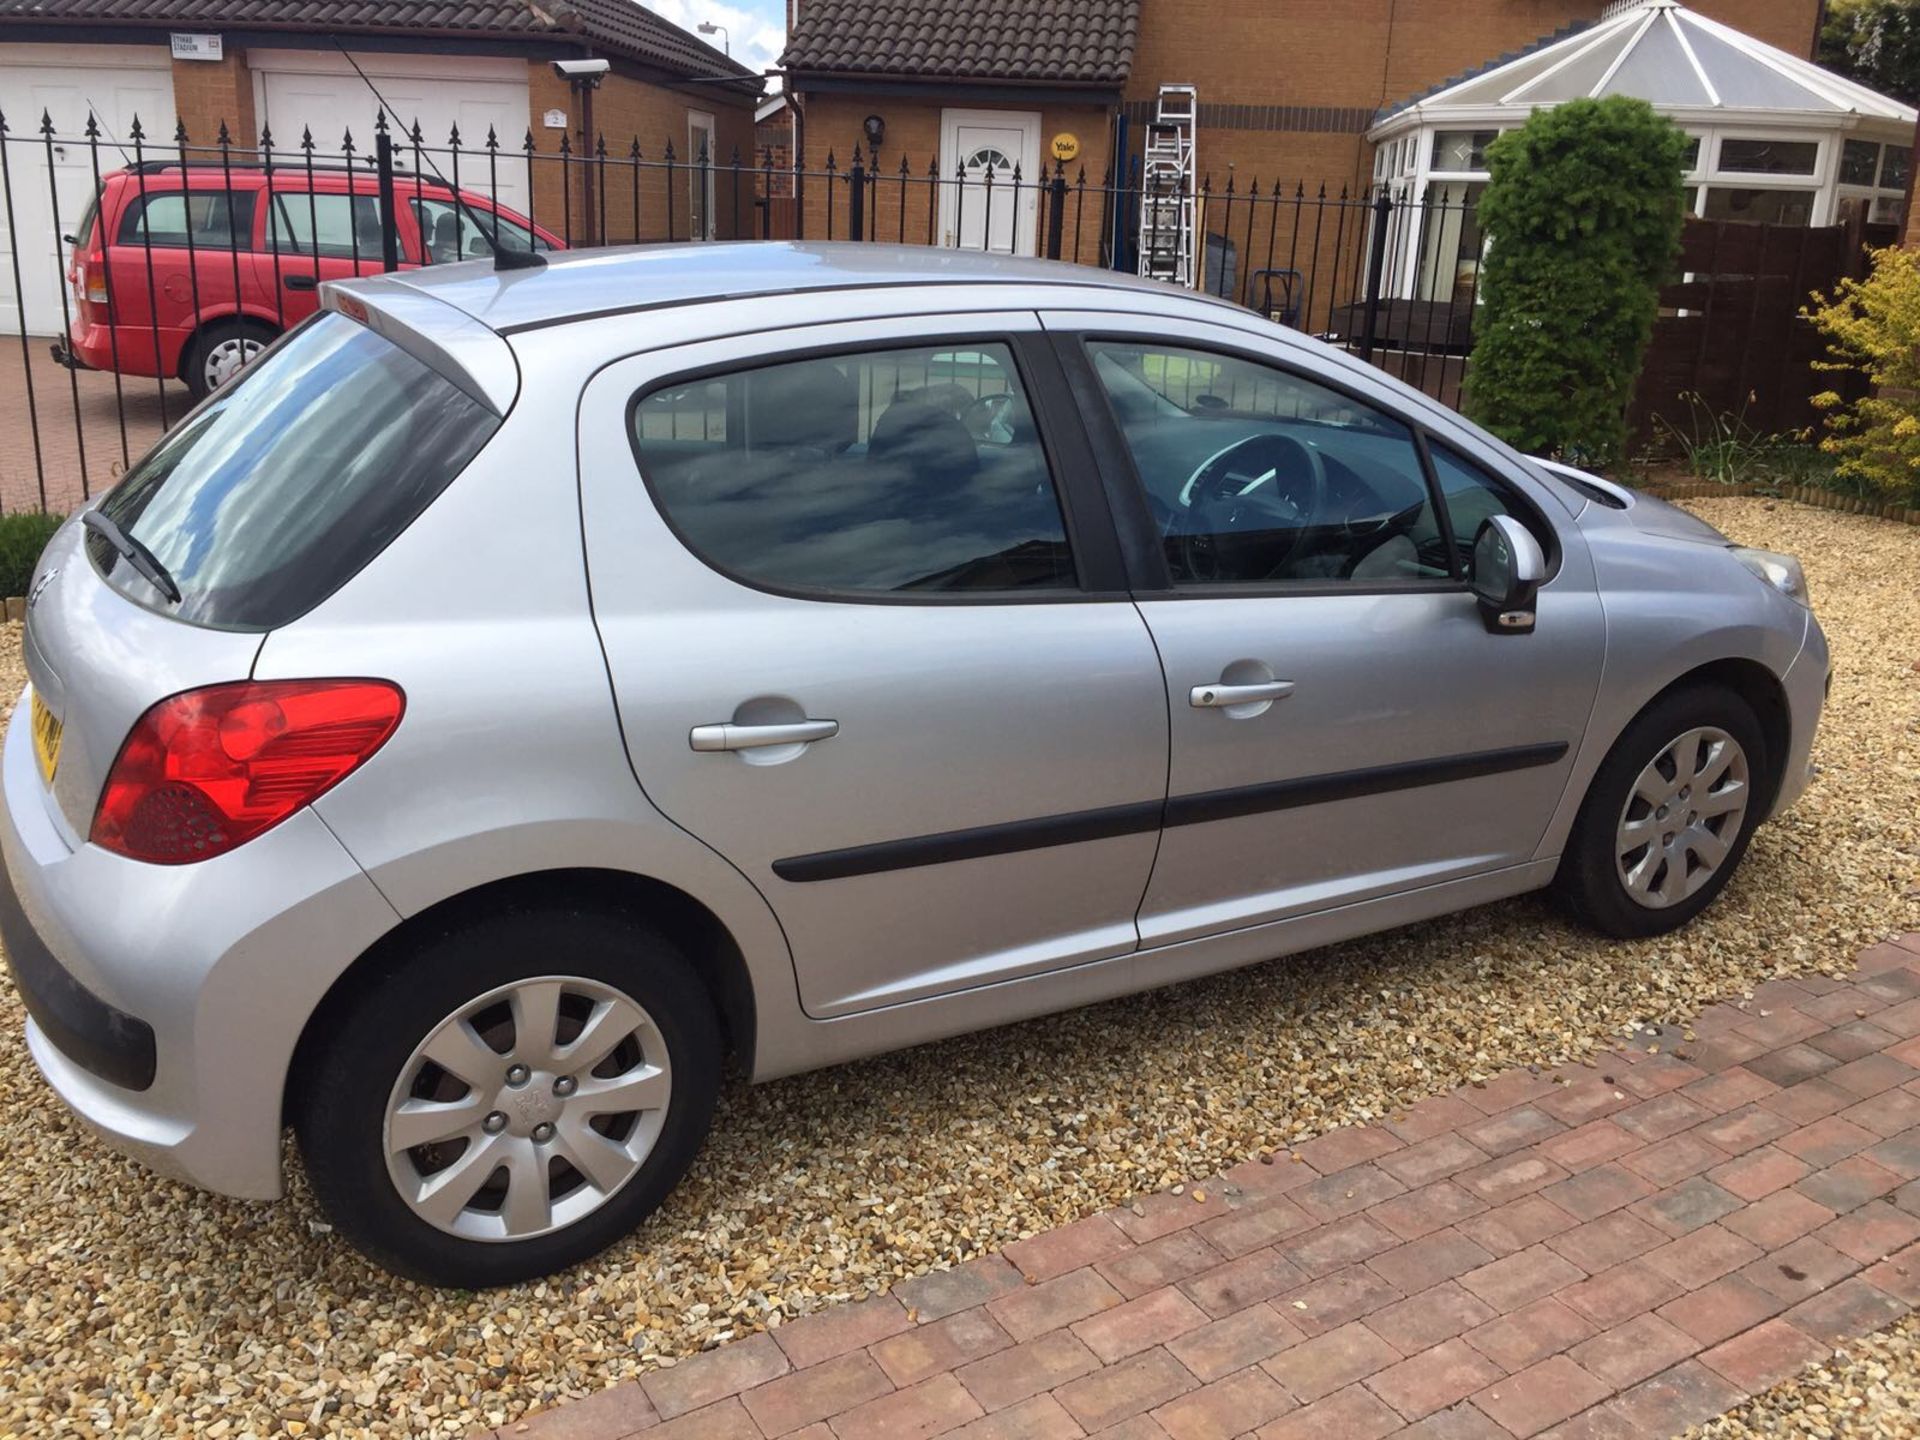 2007 Peugeot 207 86,000 Miles 12 Months MOT Petrol Located in Grantham, Lincs - Image 2 of 2